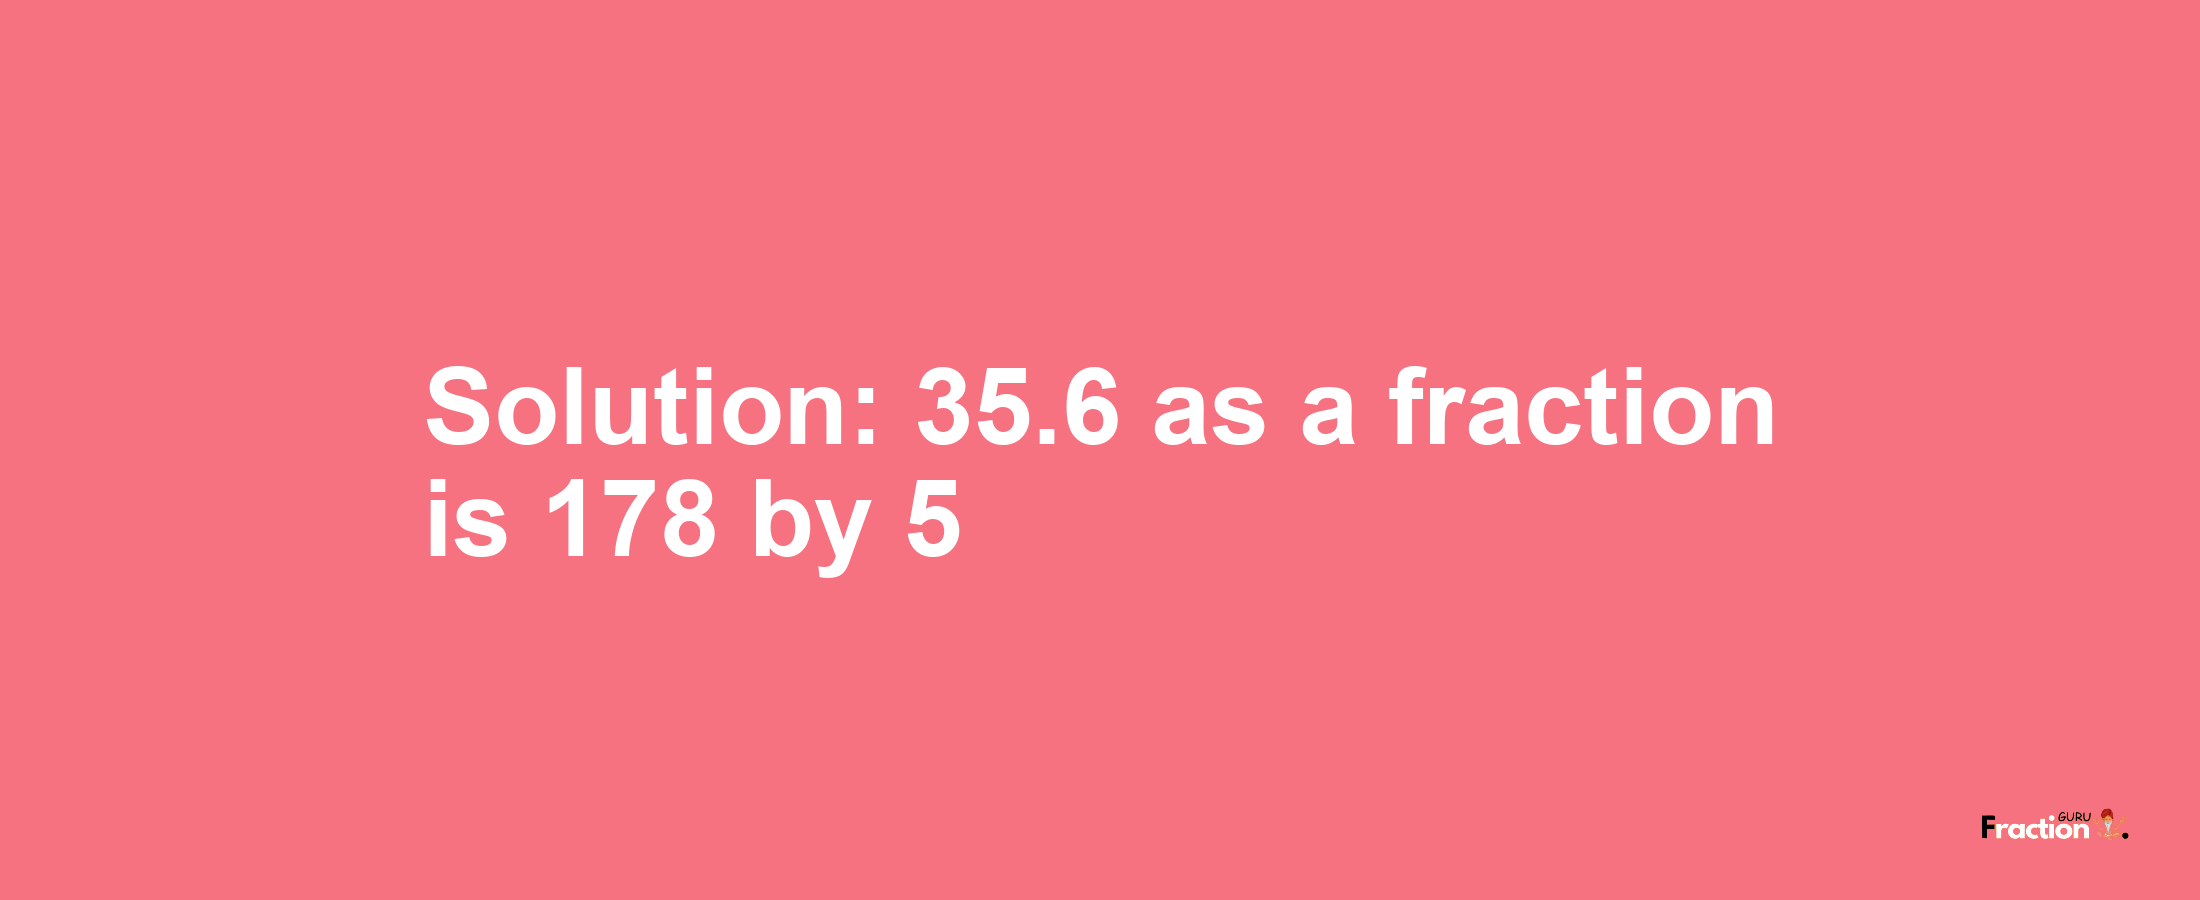 Solution:35.6 as a fraction is 178/5